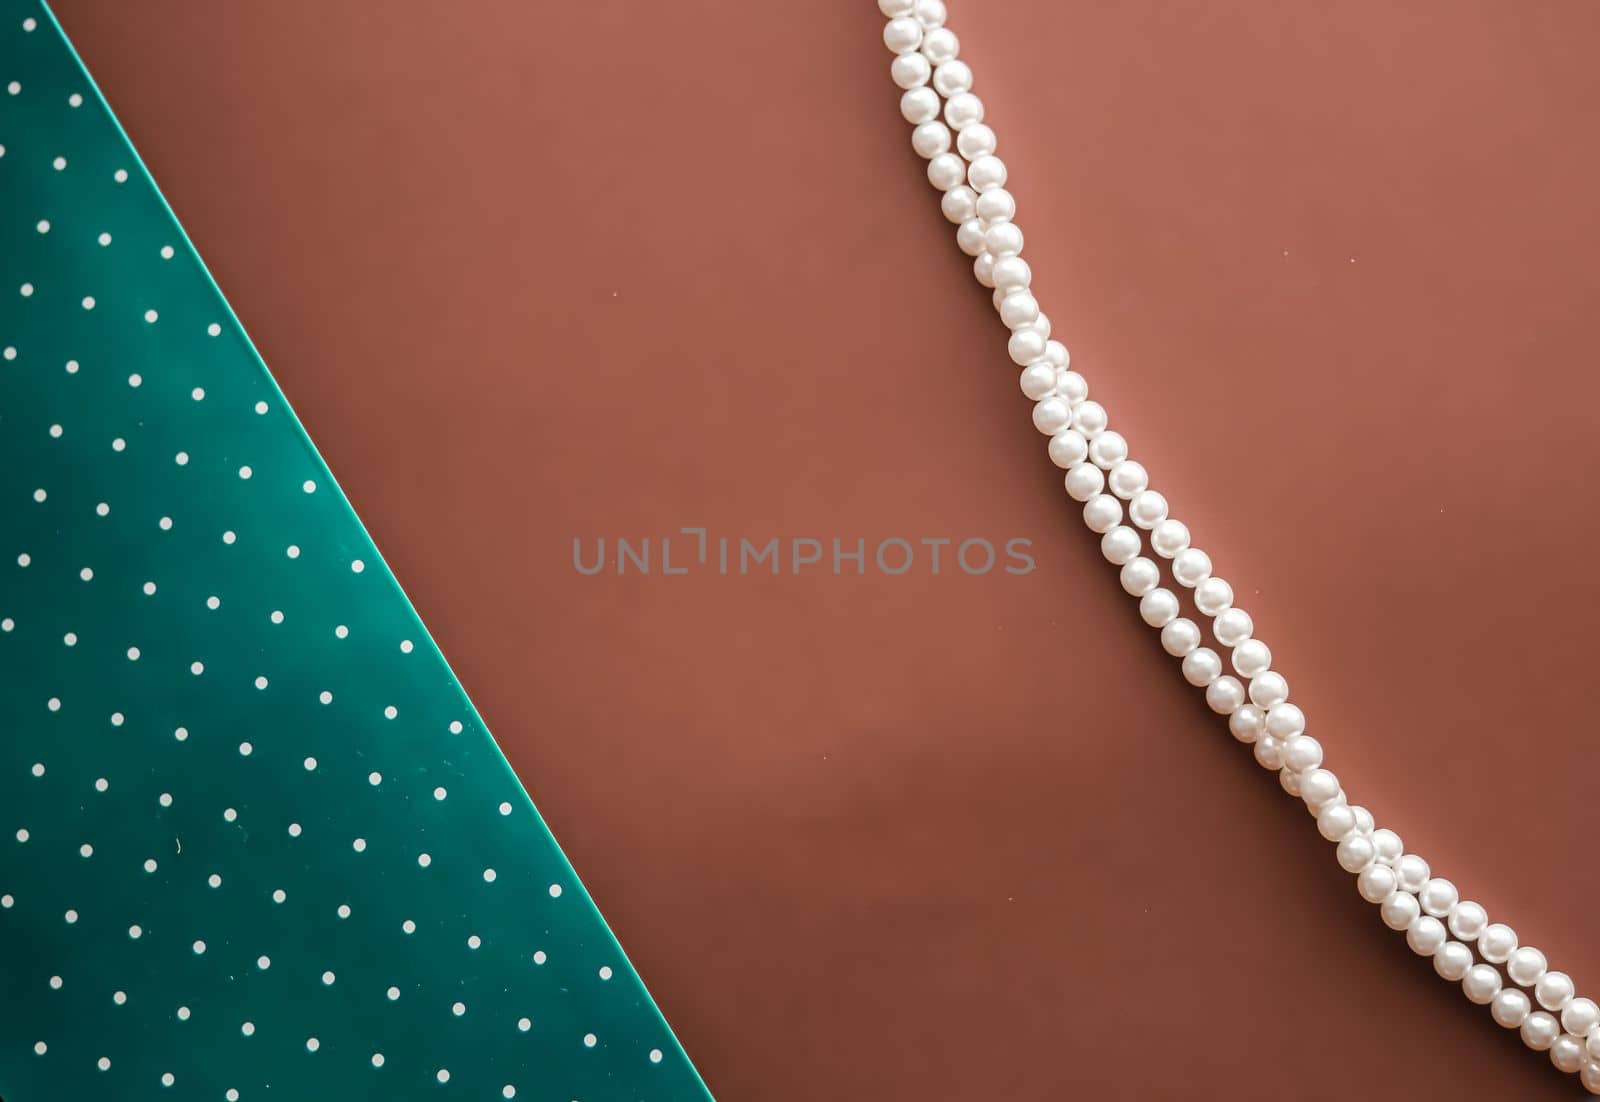 Pearl jewellery necklace and abstract green polka dot background on brown backdrop by Anneleven